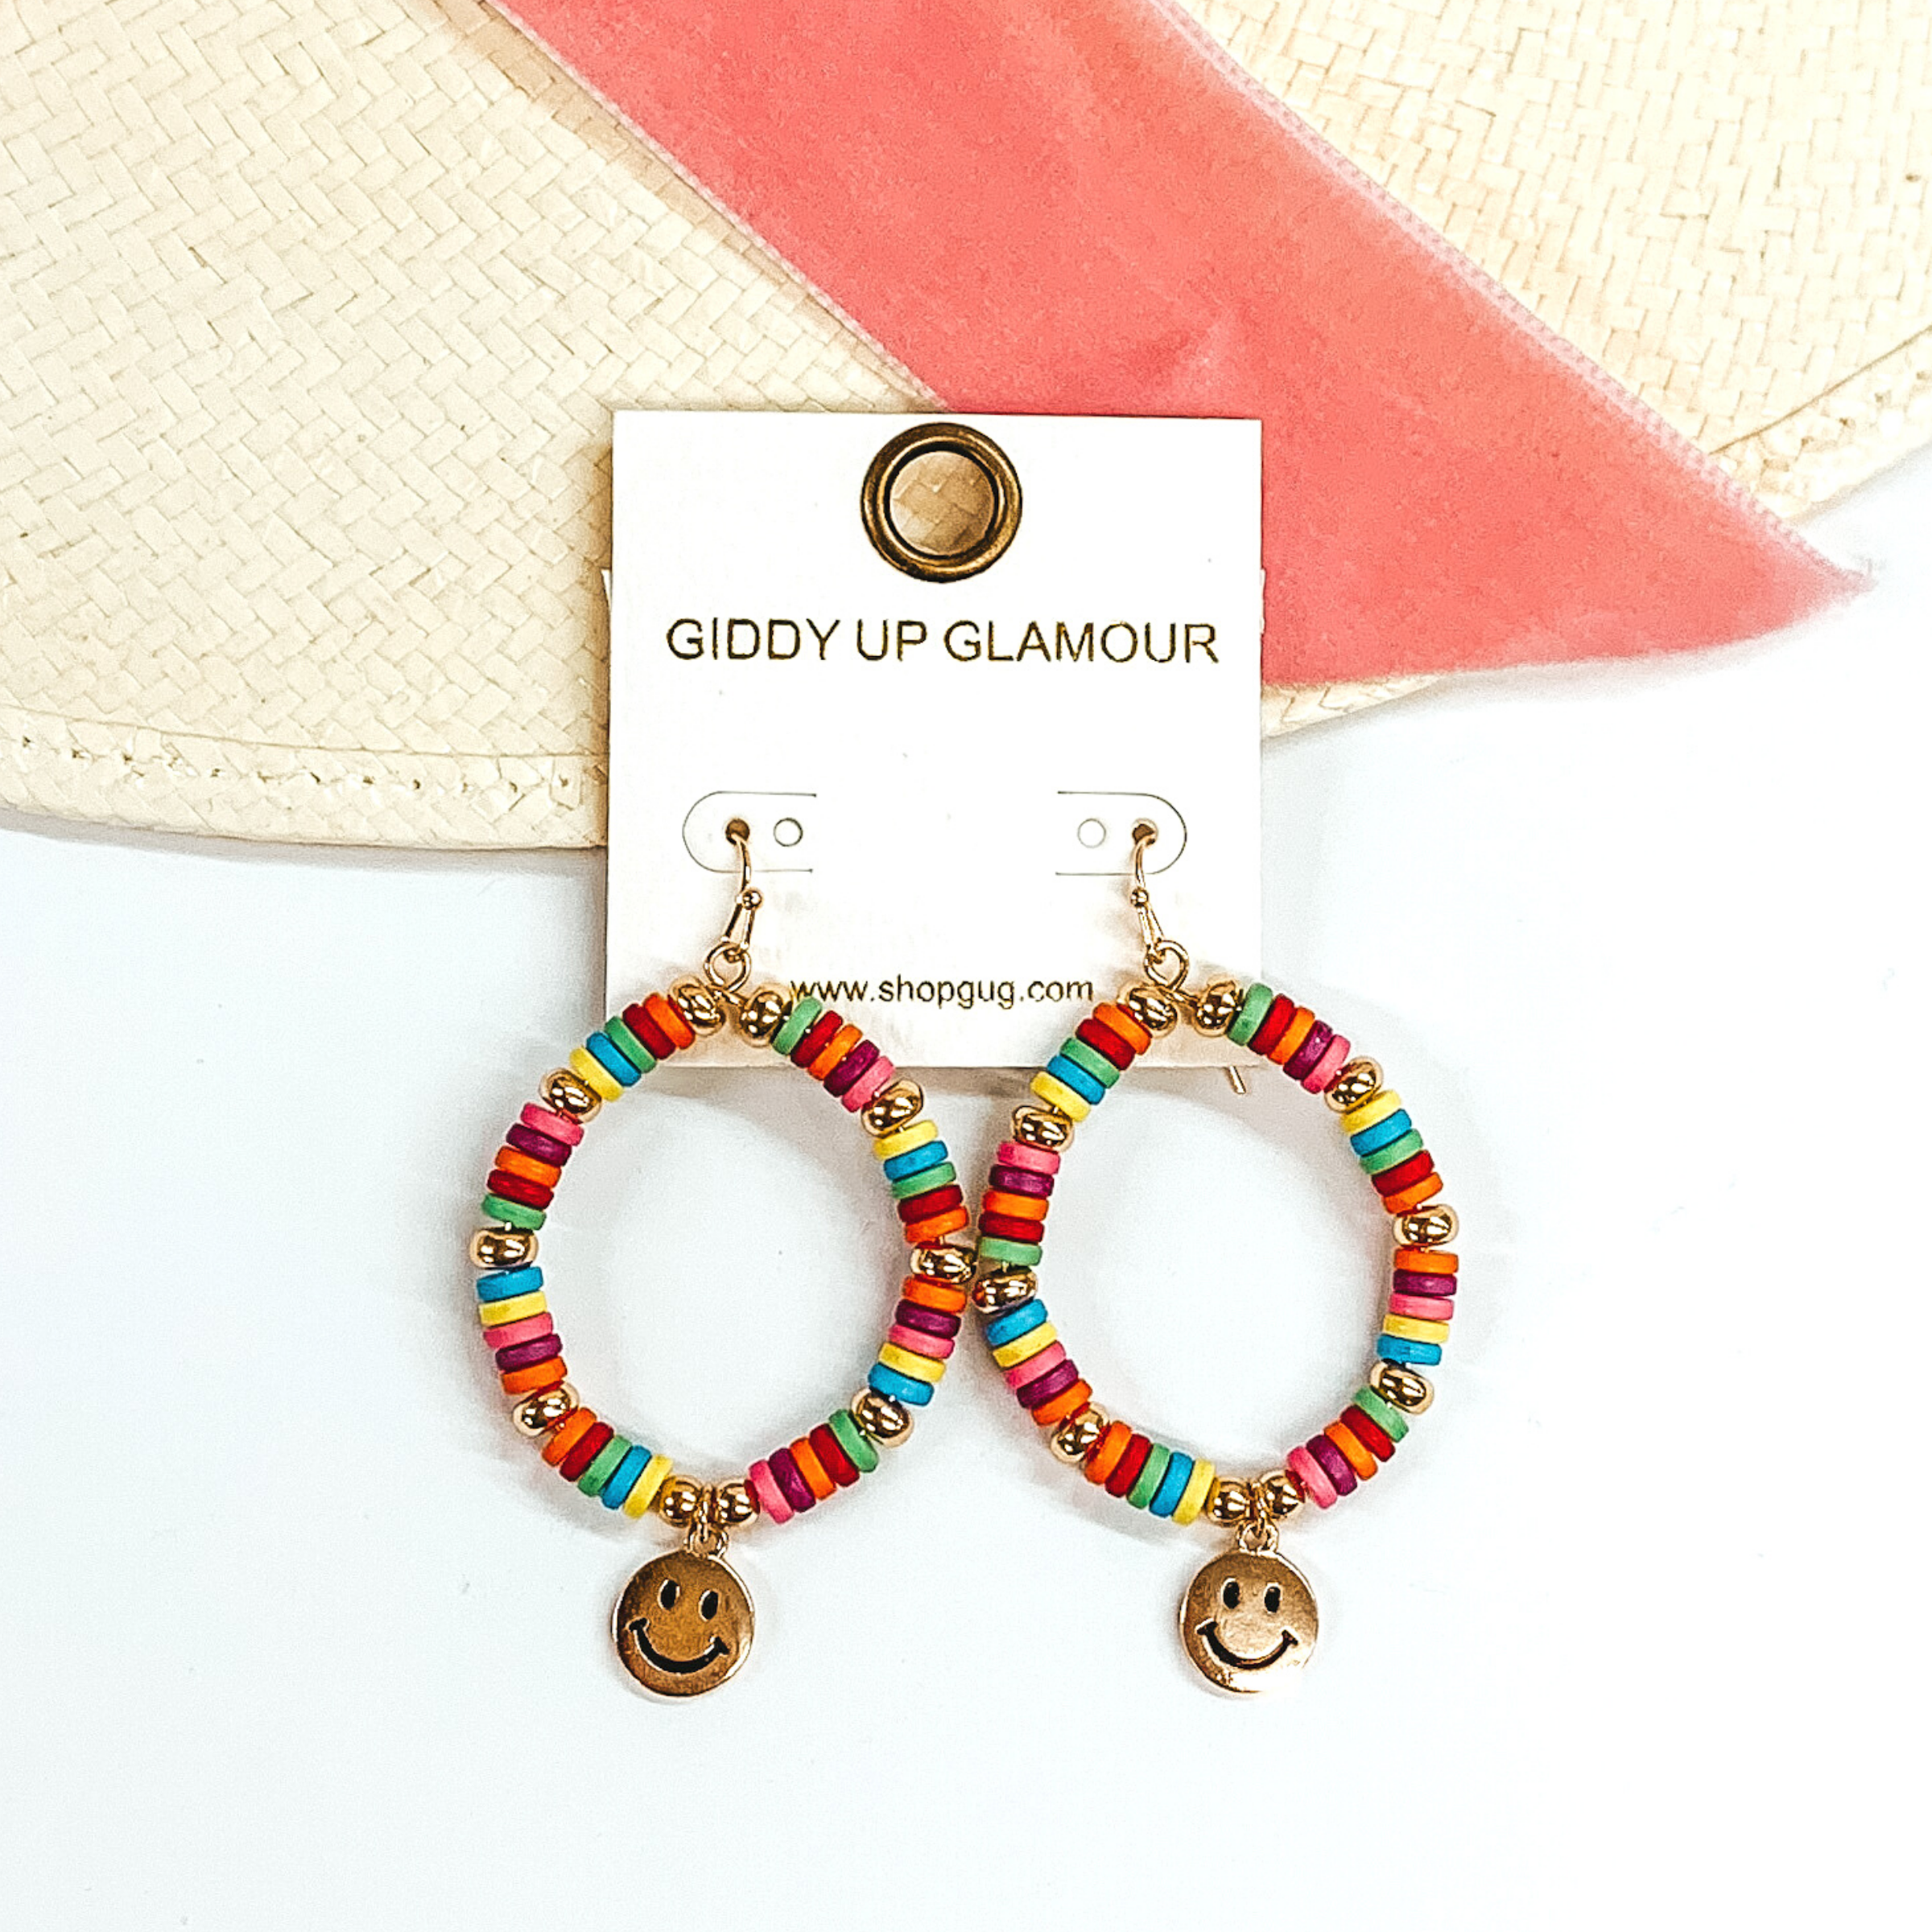 Hanging teardrop earrings with hanging gold smiley faces. These earrings are covered in multicolored and gold beads. These earrings are pictured laying partially on a straw hat with a pink velvet strip on a white background.